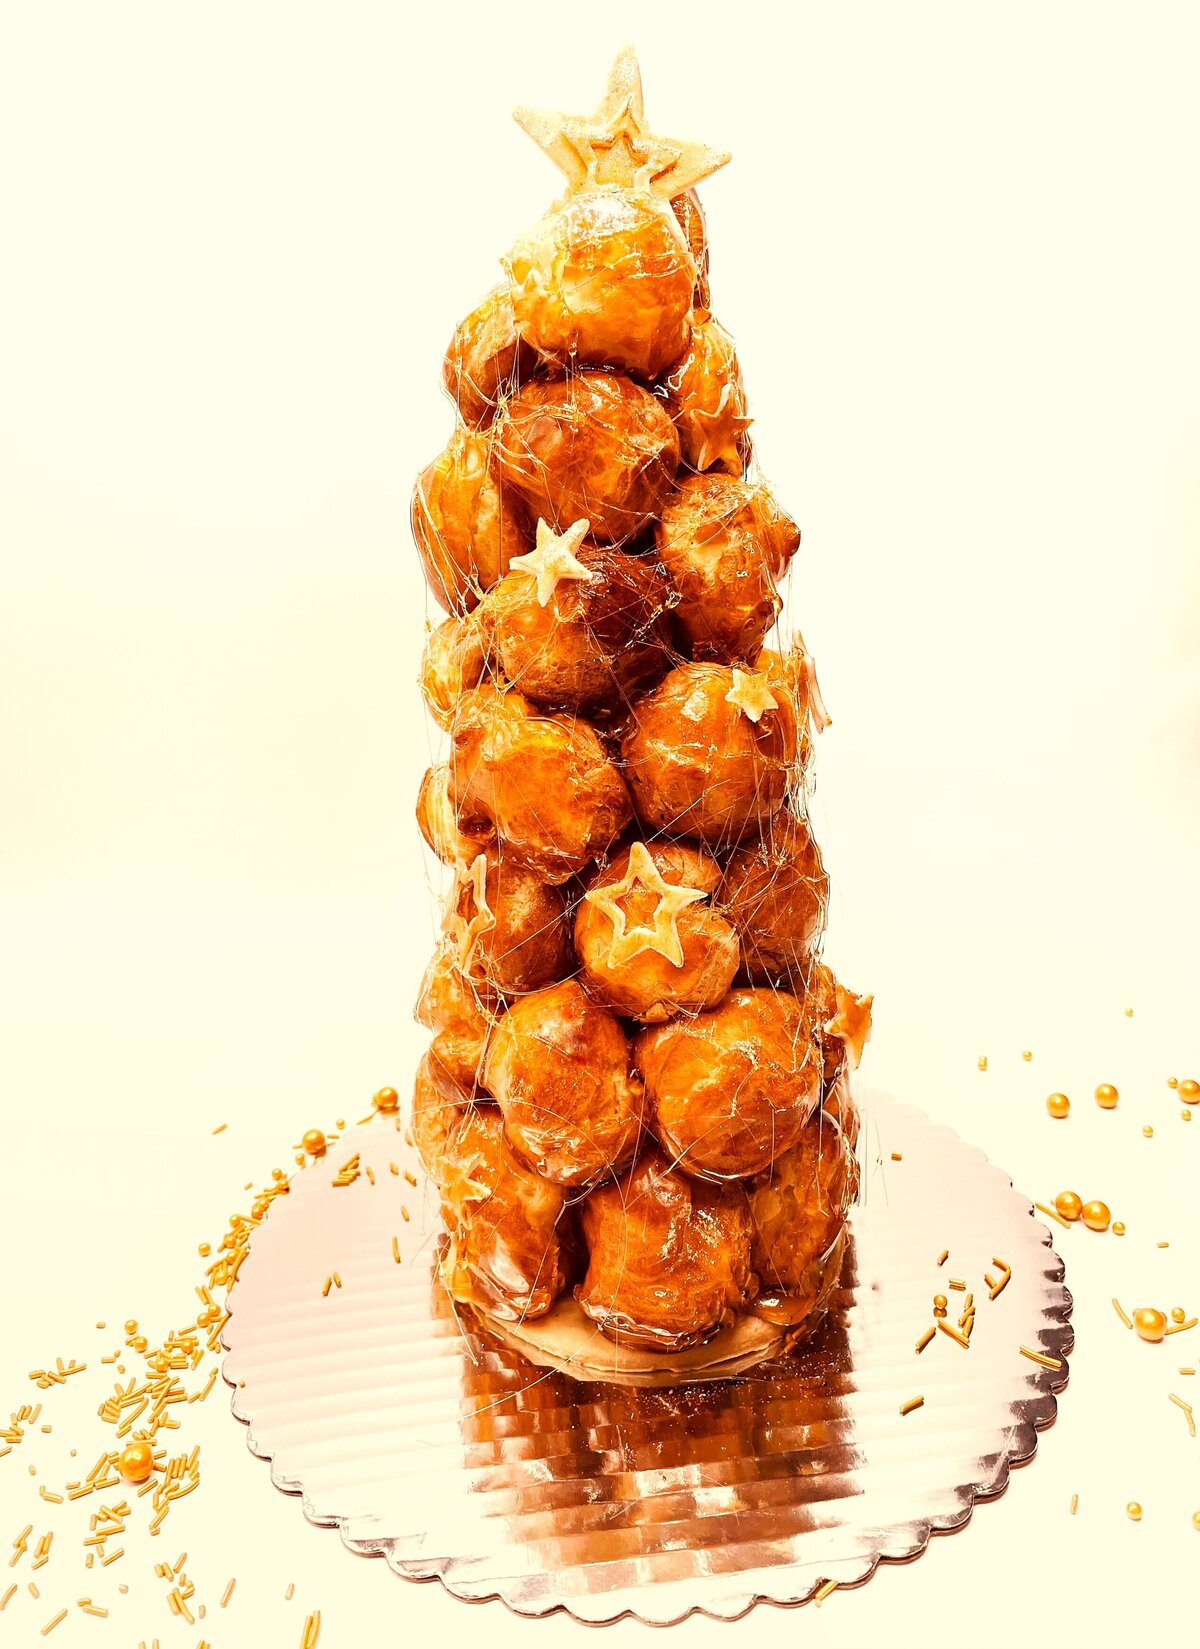 Spun sugar decorated croquembouche accented with chocolate stars. Filled with vanilla pastry cream and dipped in caramel